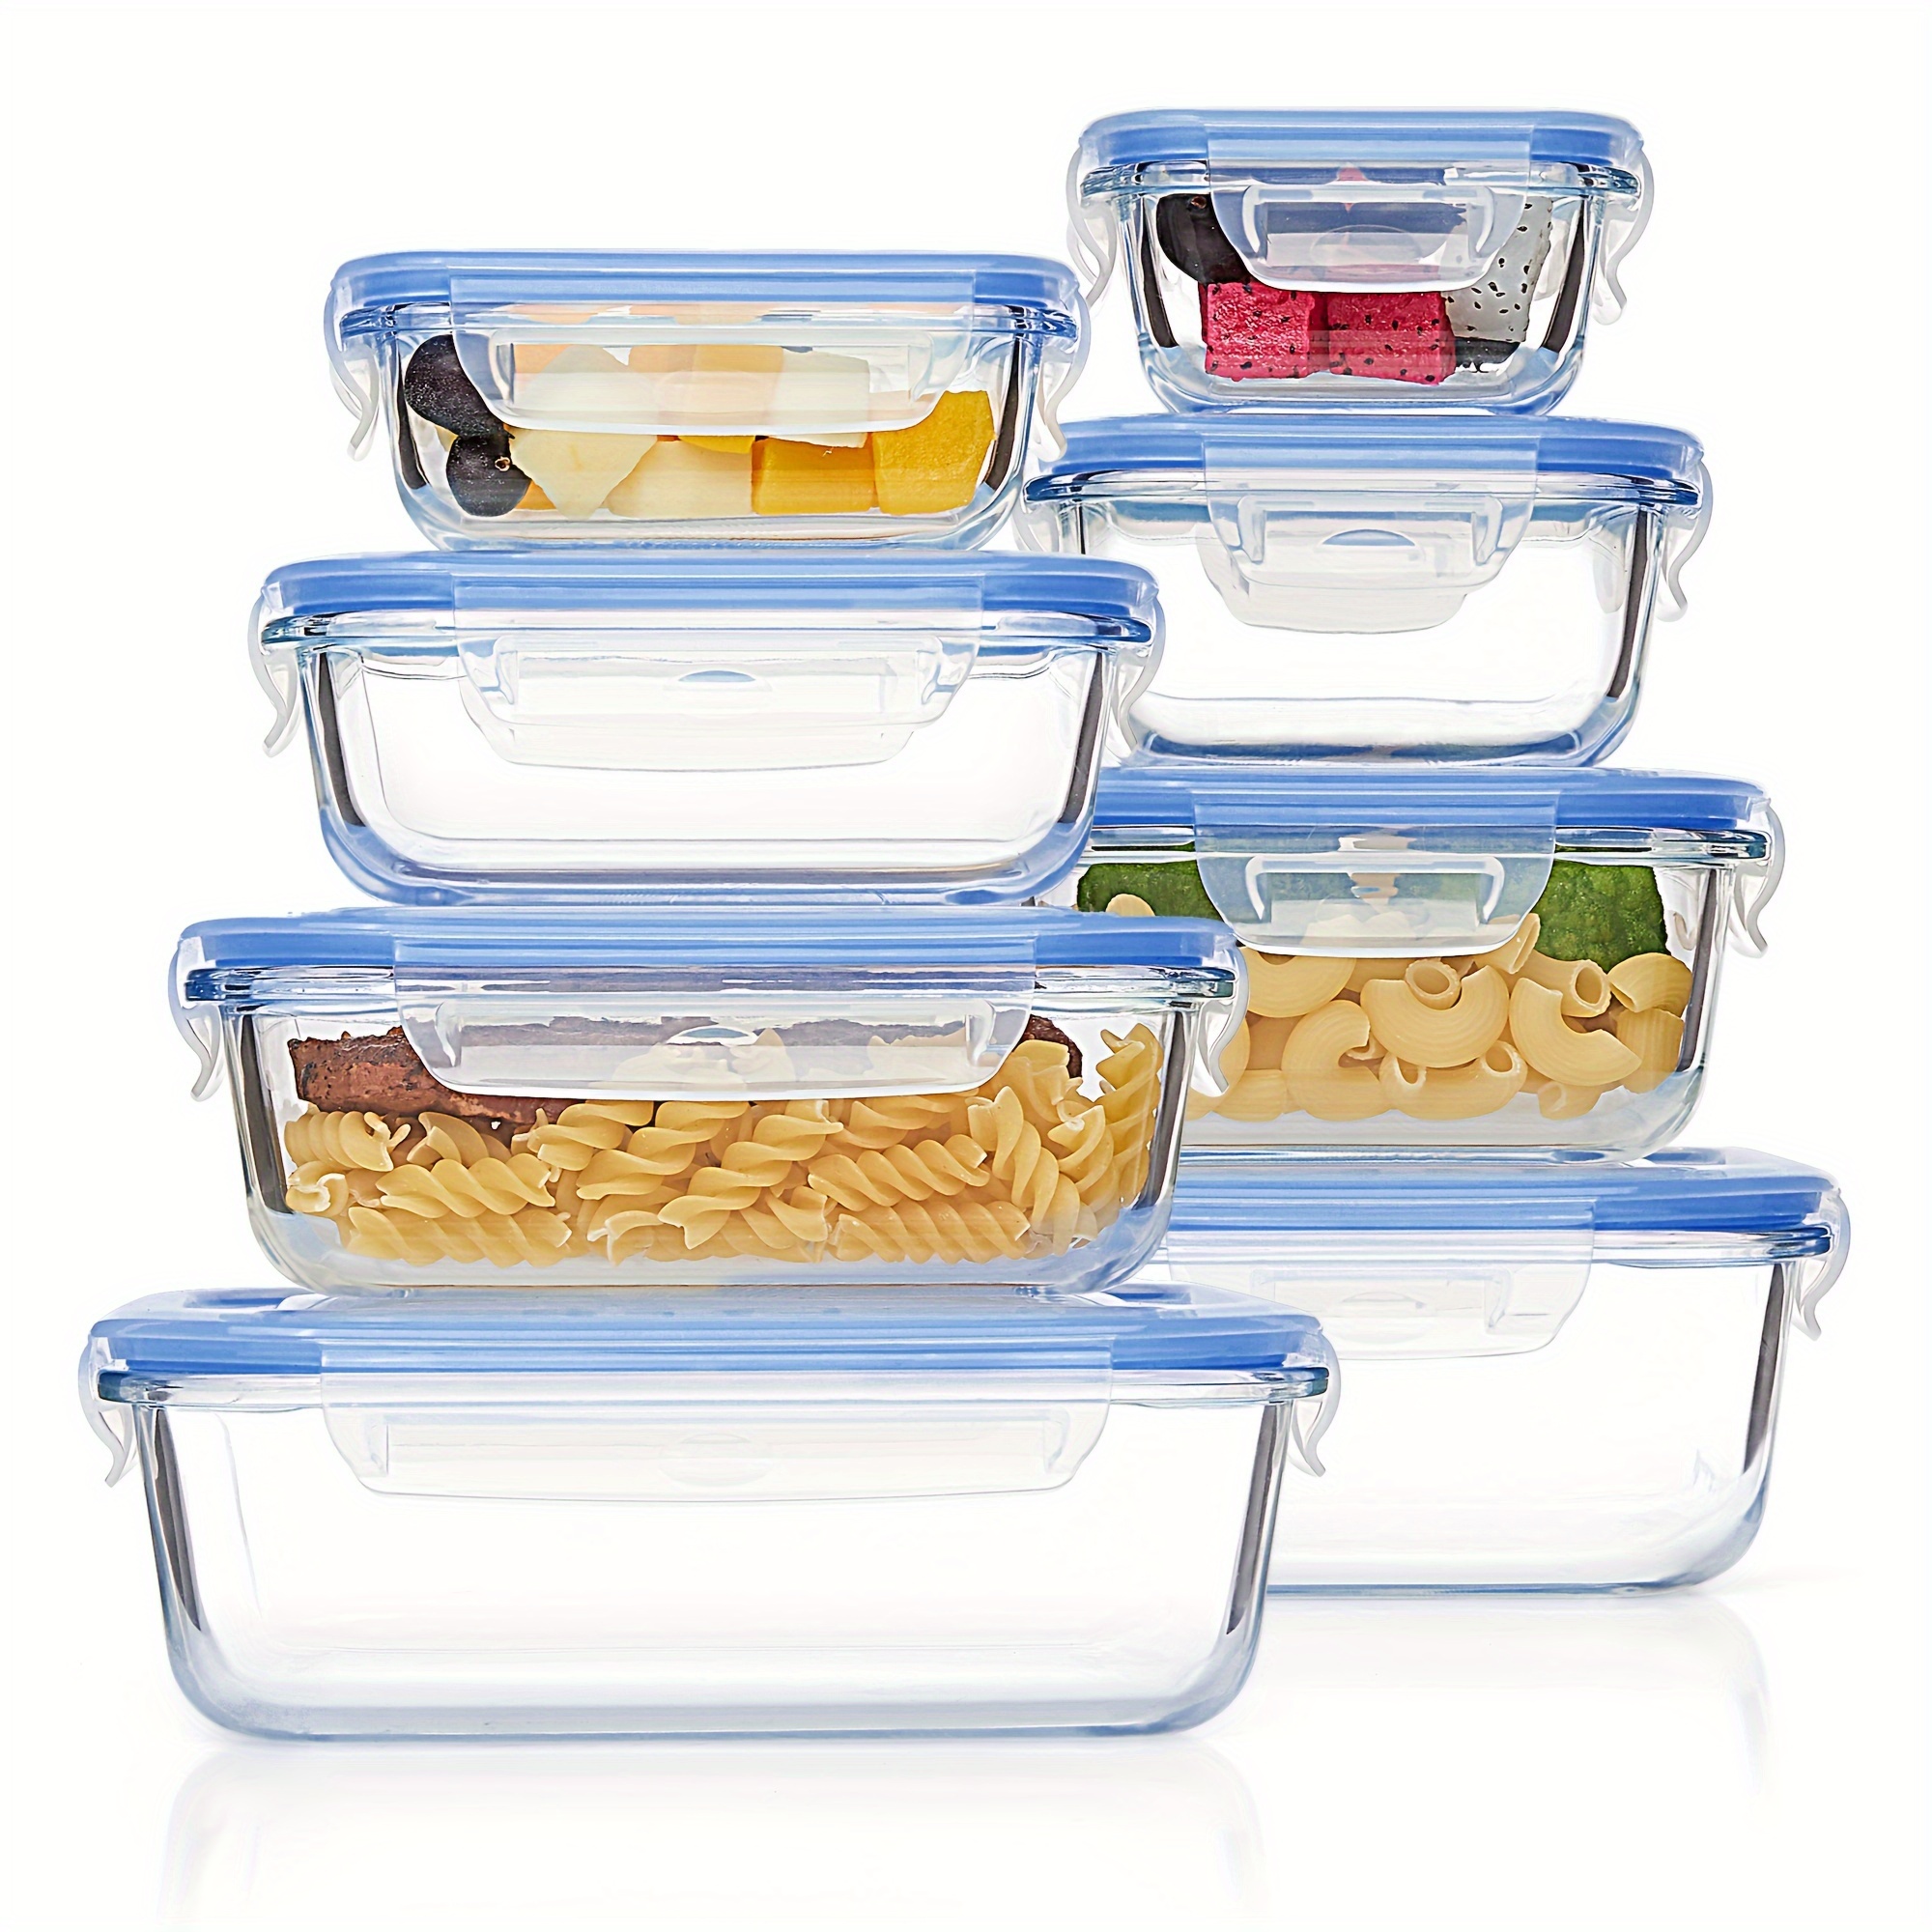 

8 Pack Glass Meal Prep Container With Lids, Lunch Containers For Food Storage, Airtight Kitchen Container For Leftover, Microwave, Oven, Freezer And Dishwasher Safe, Bpa Free